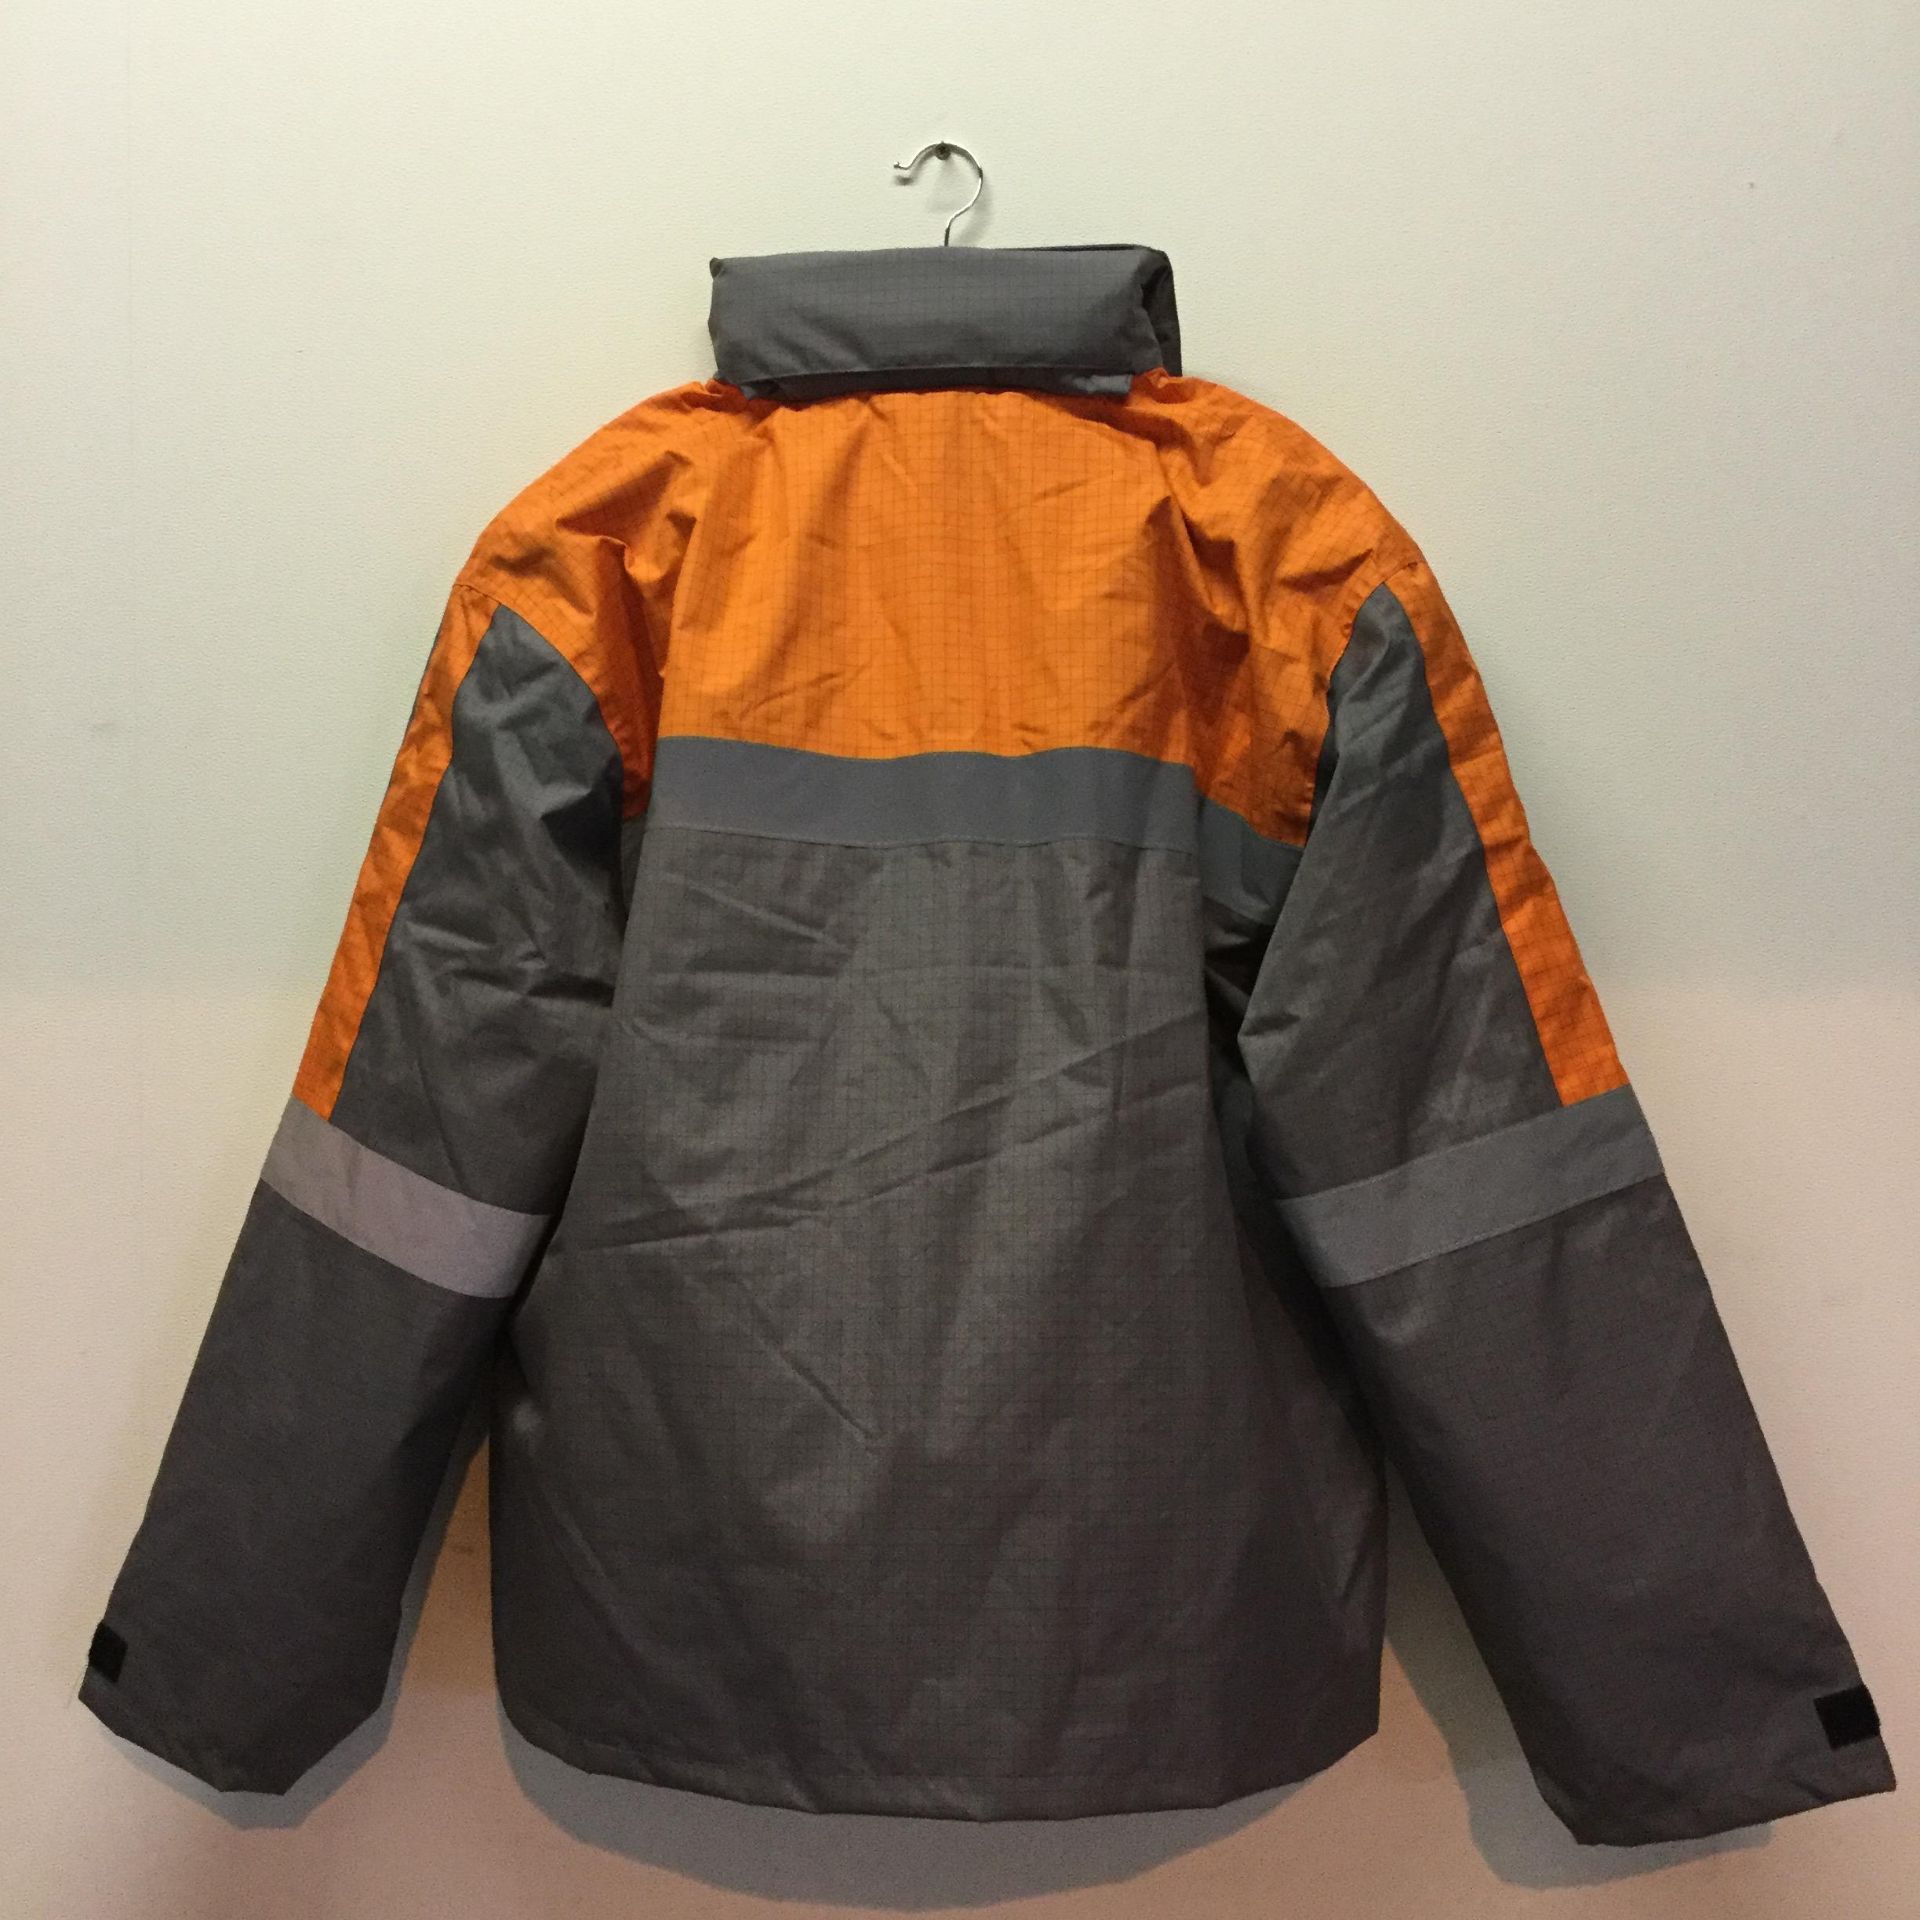 All Weather 3 layer Gortex Antistatic waterproof Jackets - Size 60 - Image 2 of 2